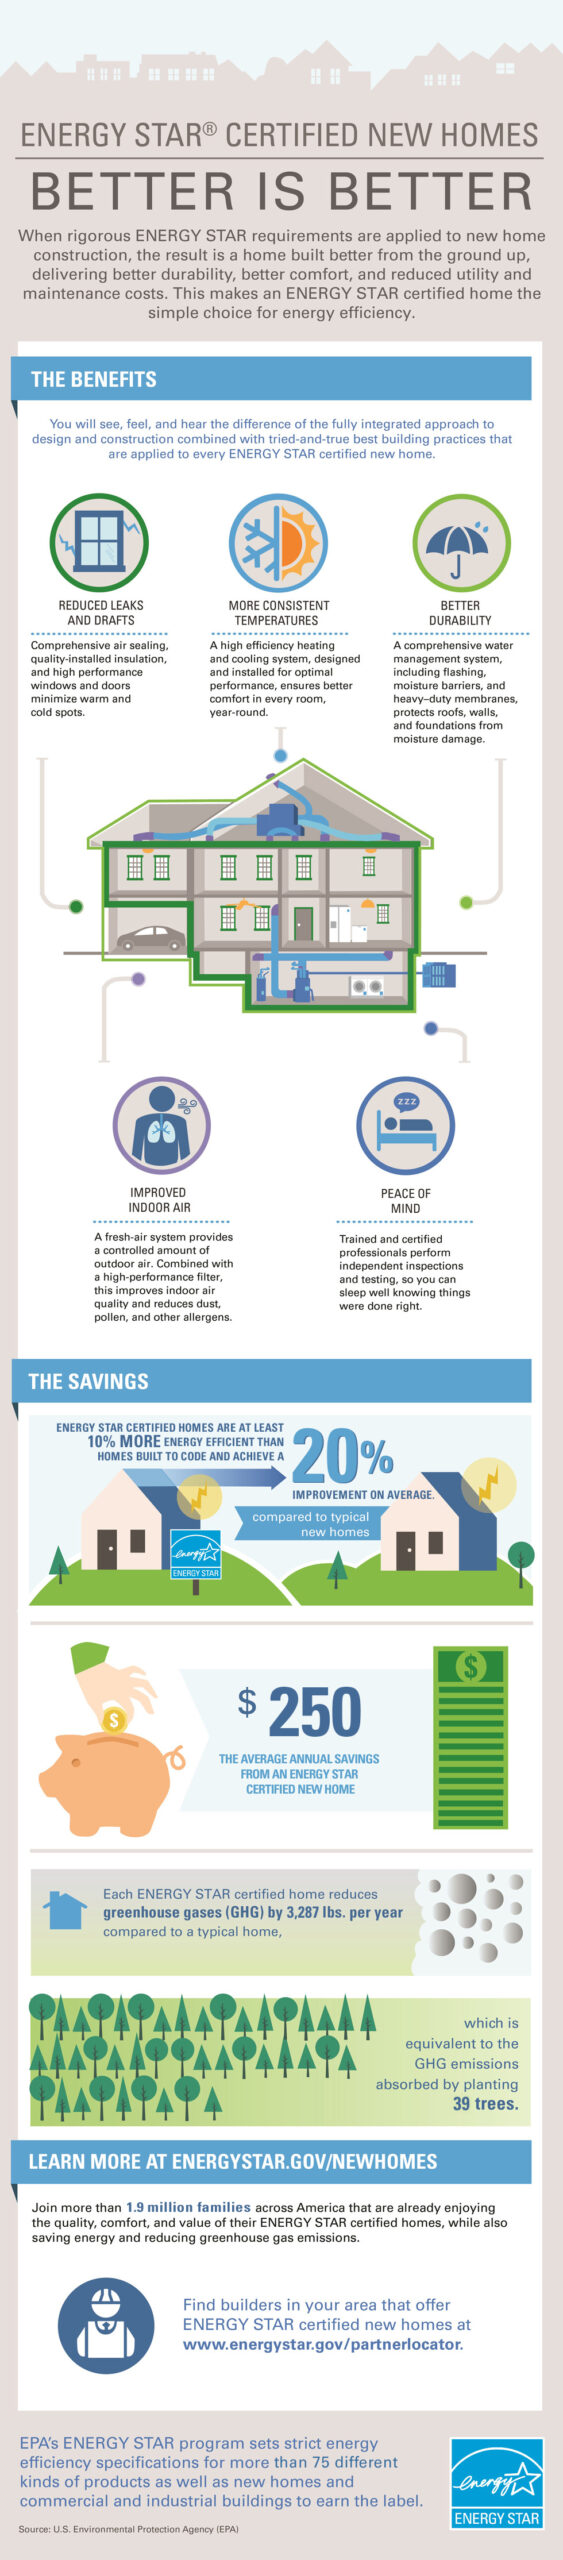 Energy STAR Home Features and Benefits